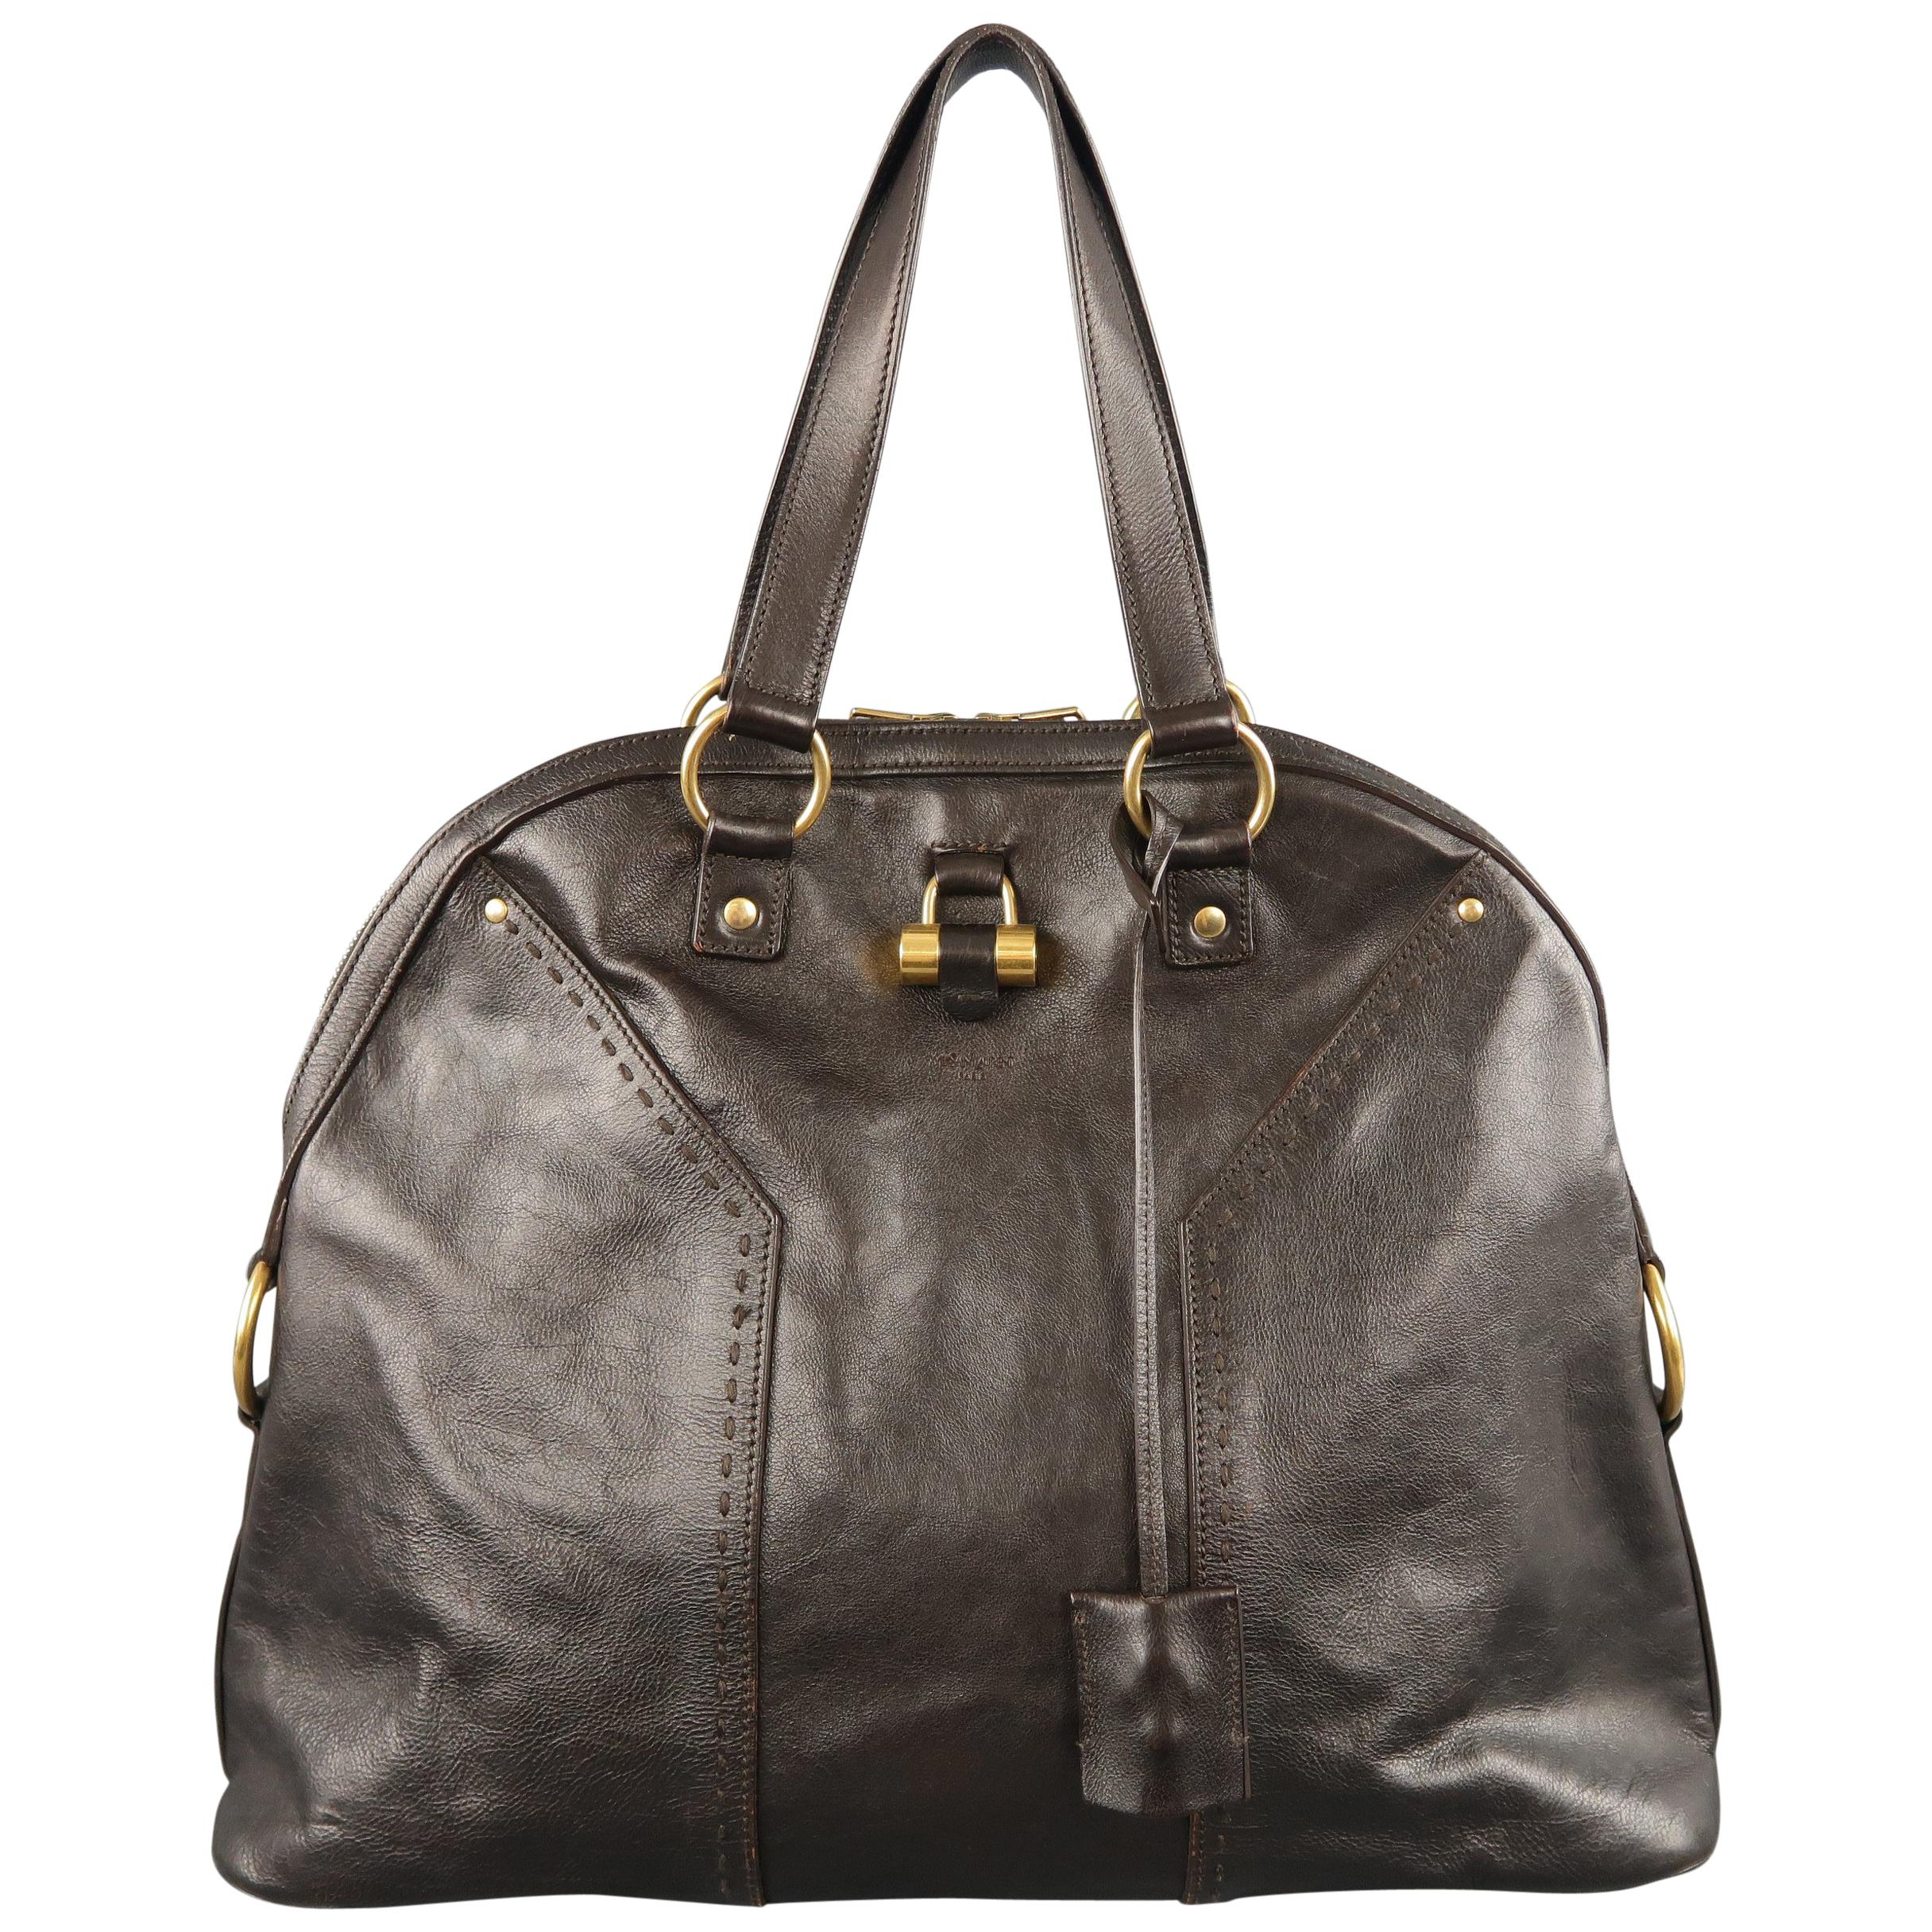 YVES SAINT LAURENT Brown Leather Gold Brass Hardware MUSE Tote Bag